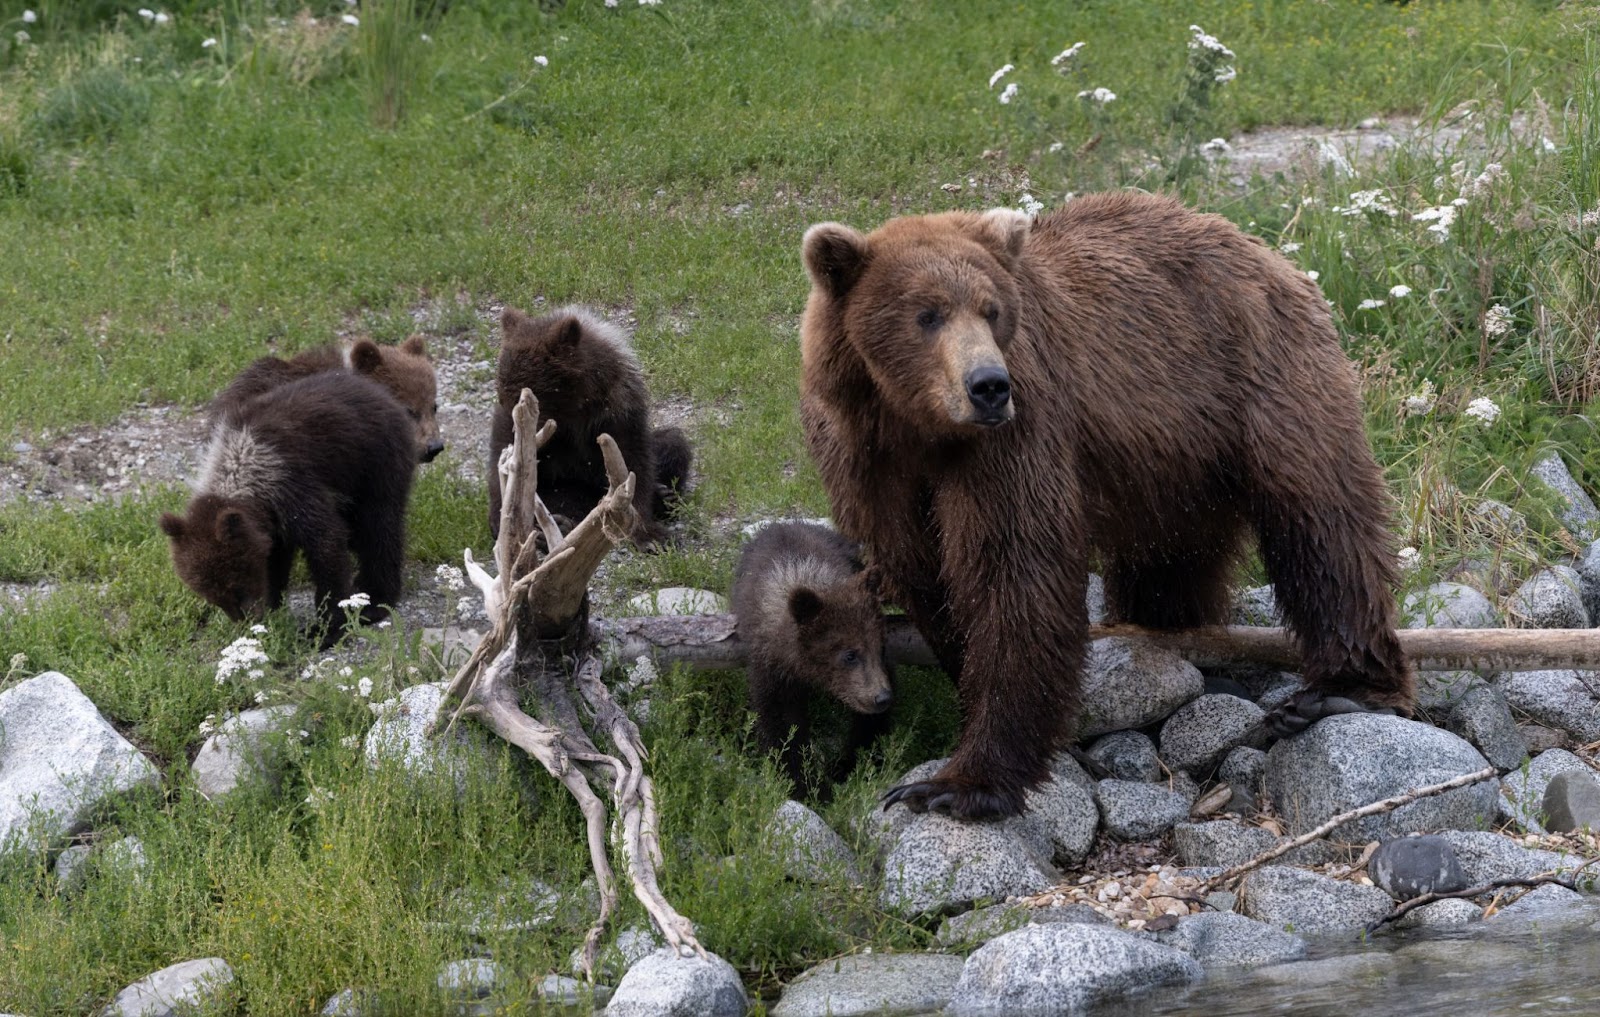 Bear 94 or Quad Mom with her four cubs